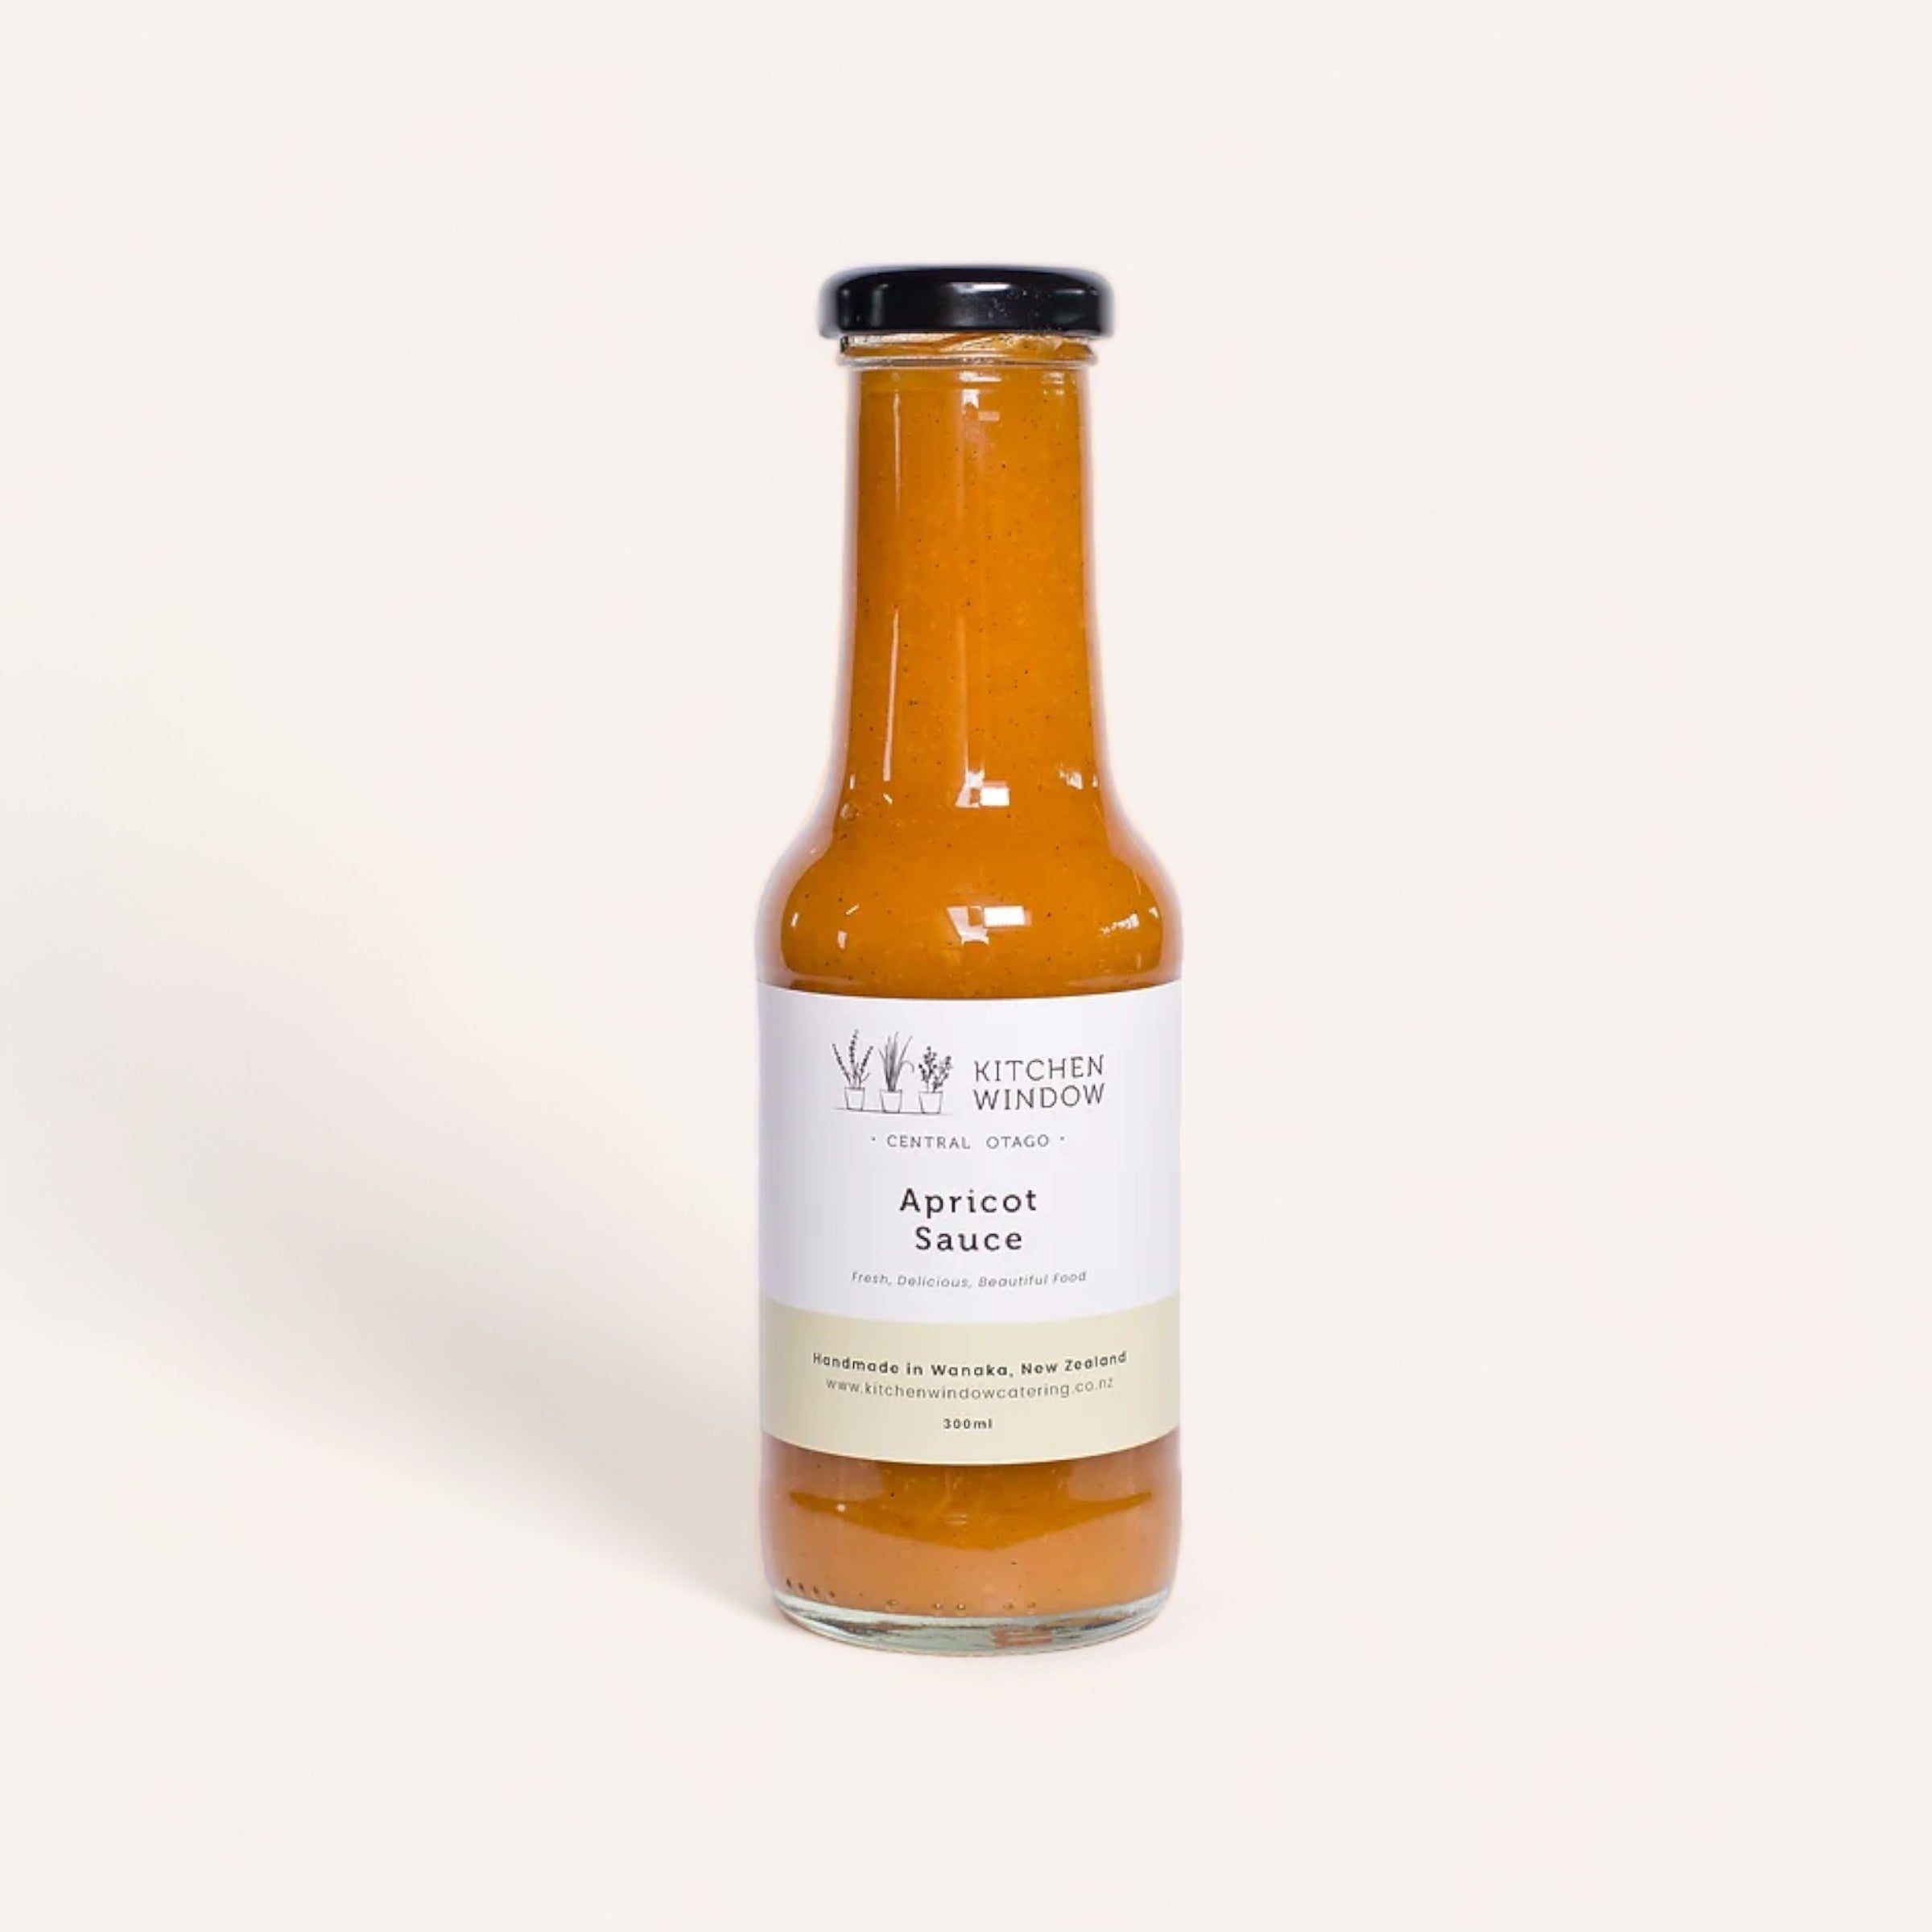 A bottle of Apricot Sauce by Kitchen Window made with Central Otago apricots from Kitchen Window brand against a clean, white background.